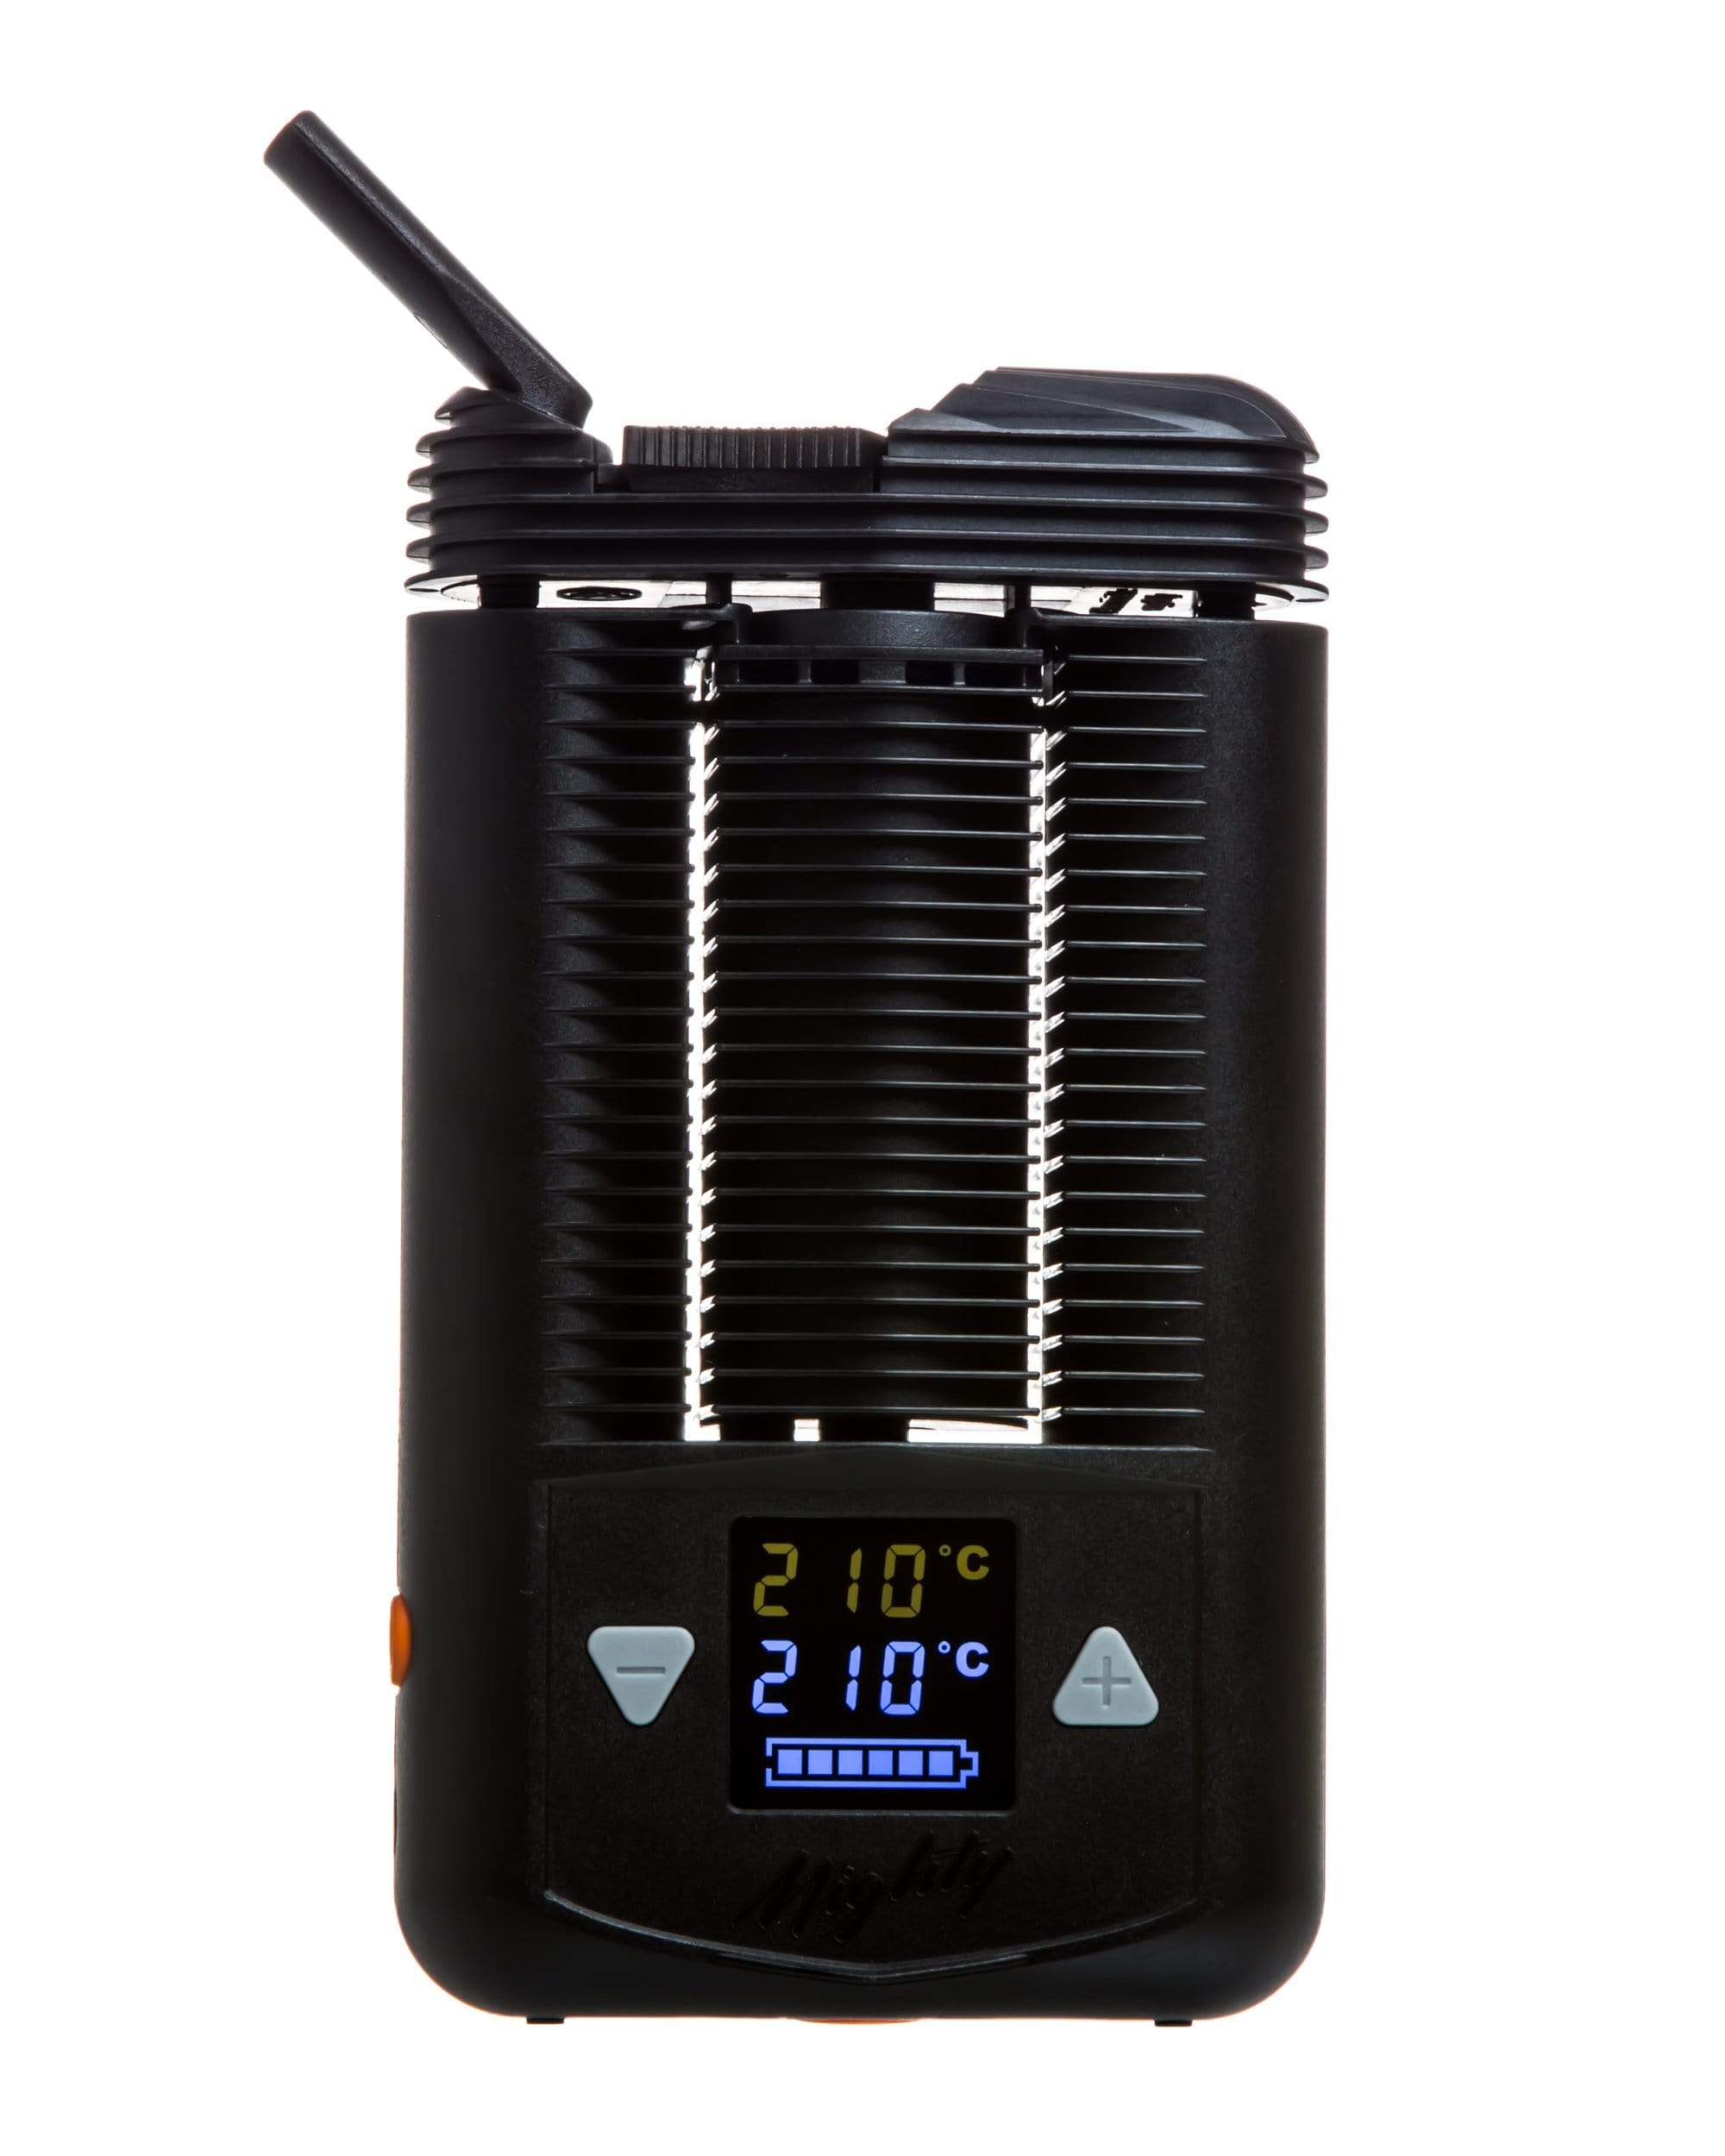 Storz Bickel Mighty Portable Weed Vaporizer - World of Bongs